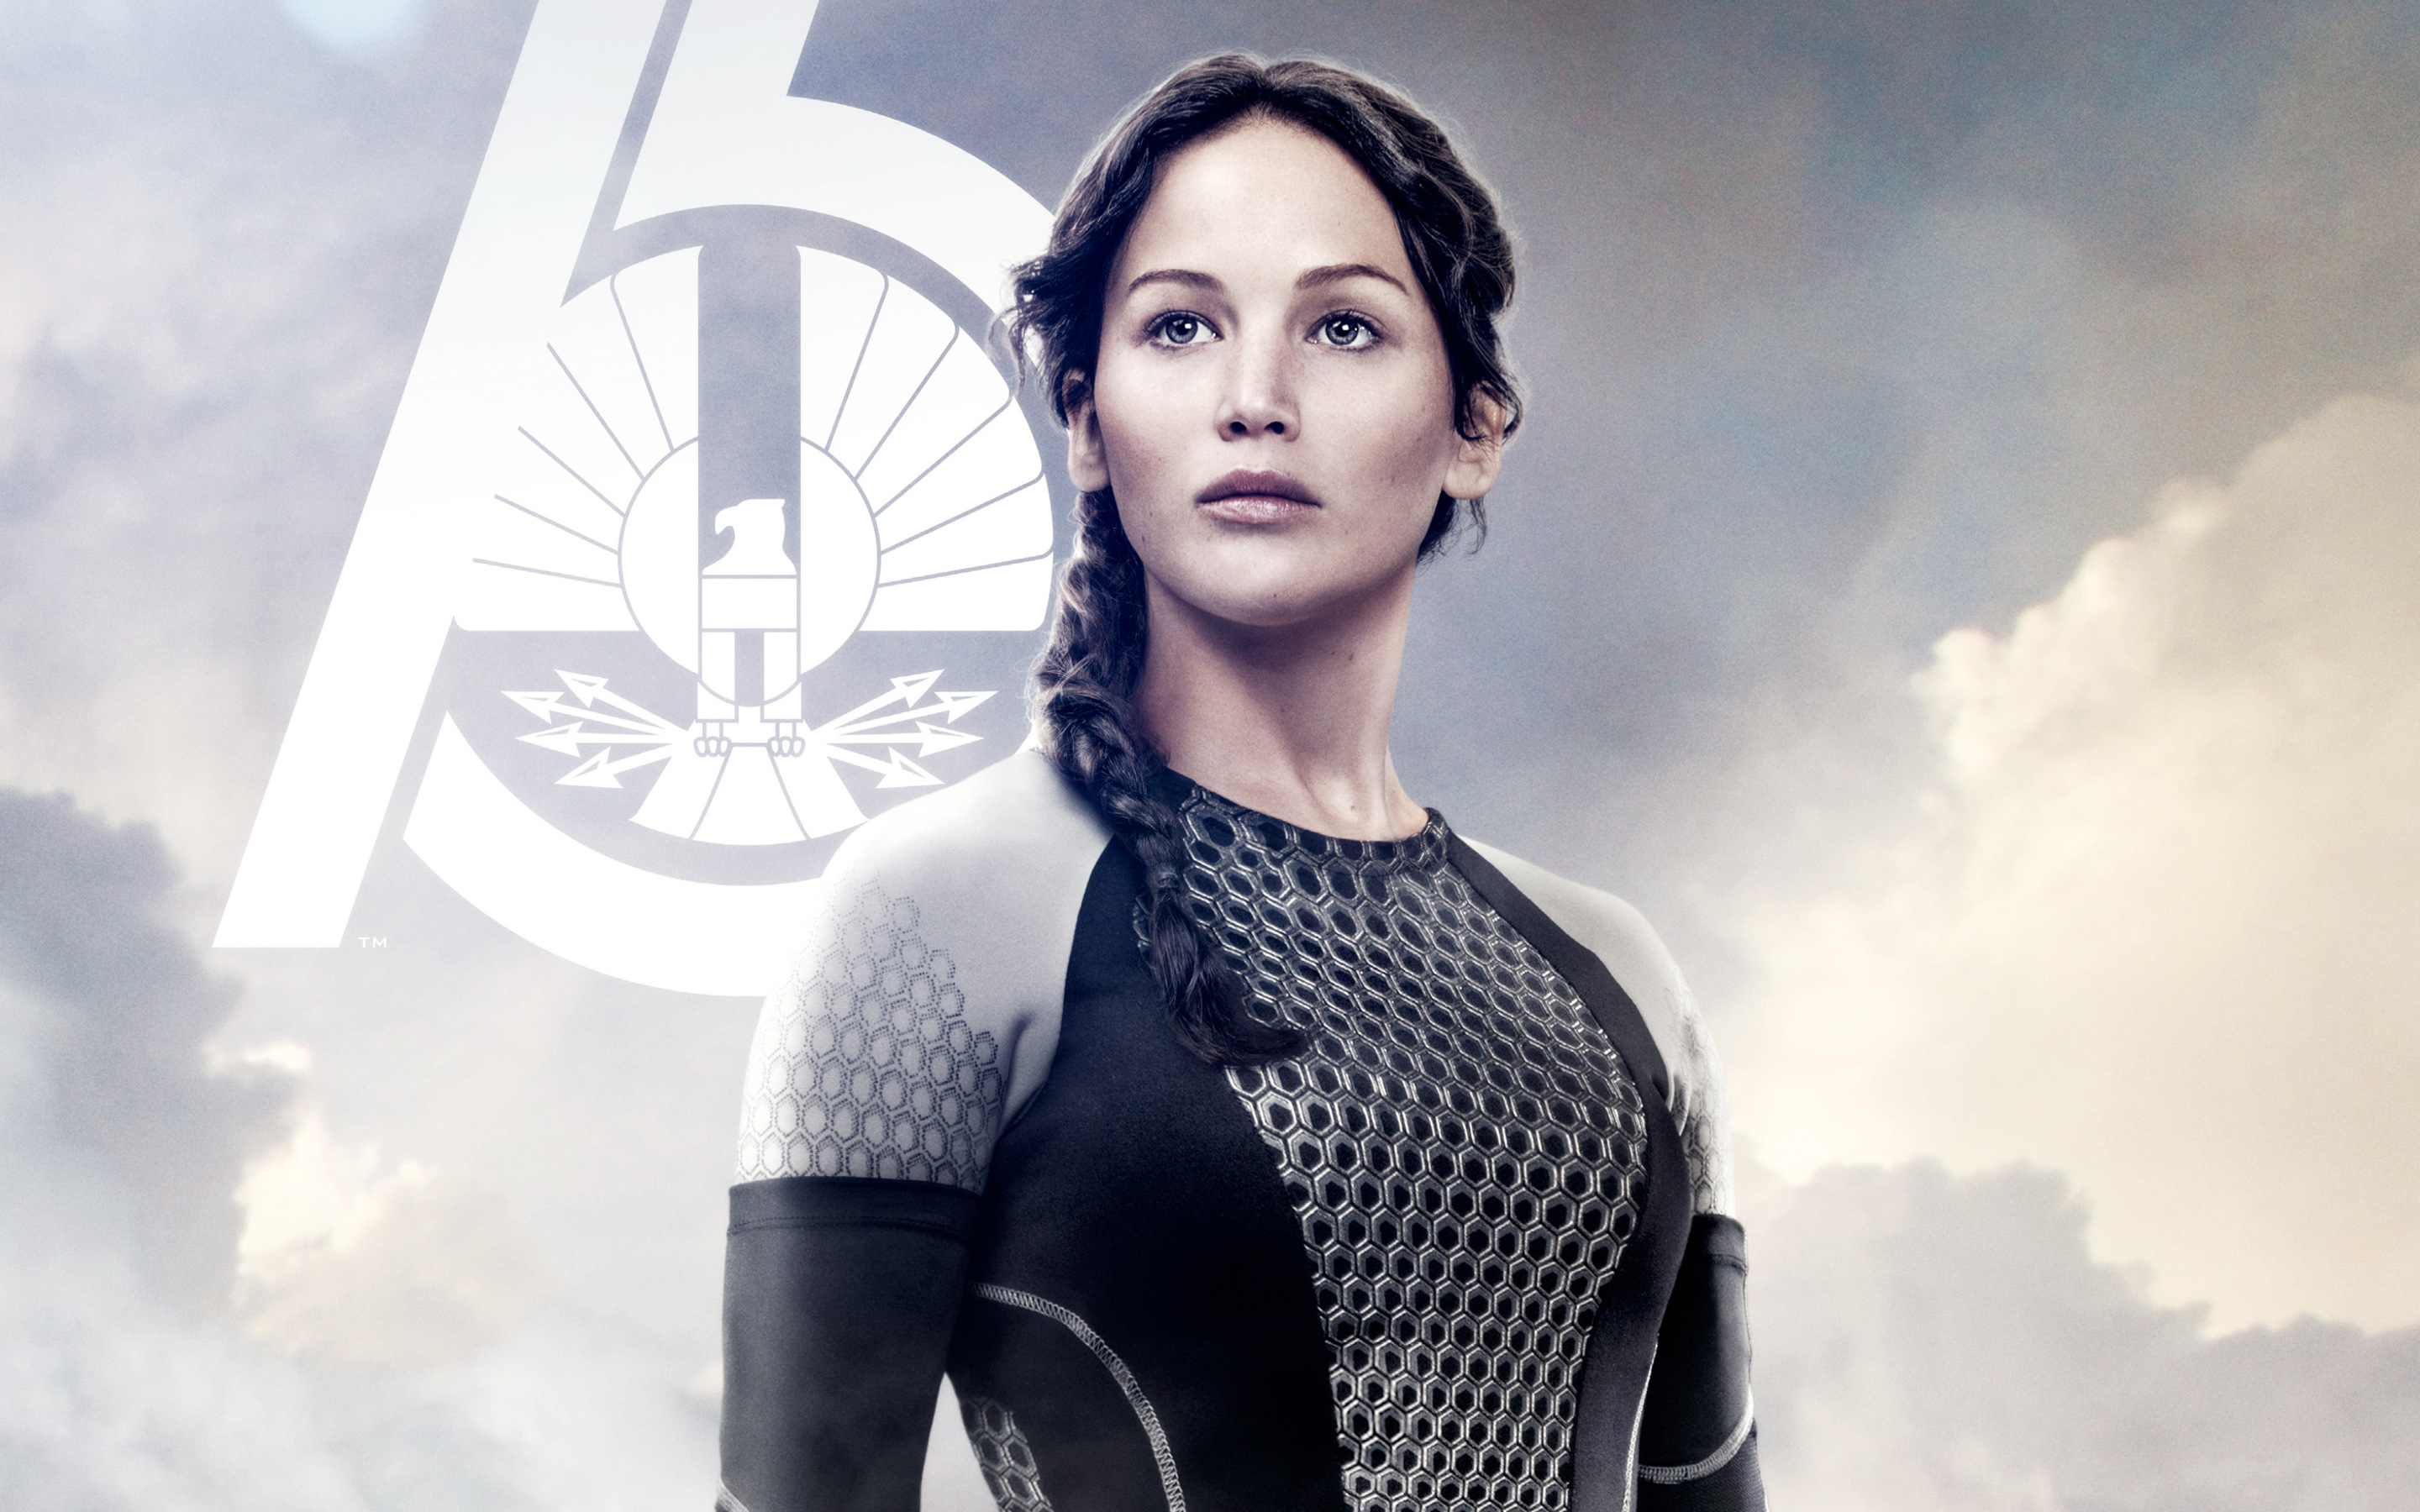 Jennifer Lawrence In The Hunger Games Catching Fire - Jennifer Lawrence Hunger Games Catching Fire , HD Wallpaper & Backgrounds